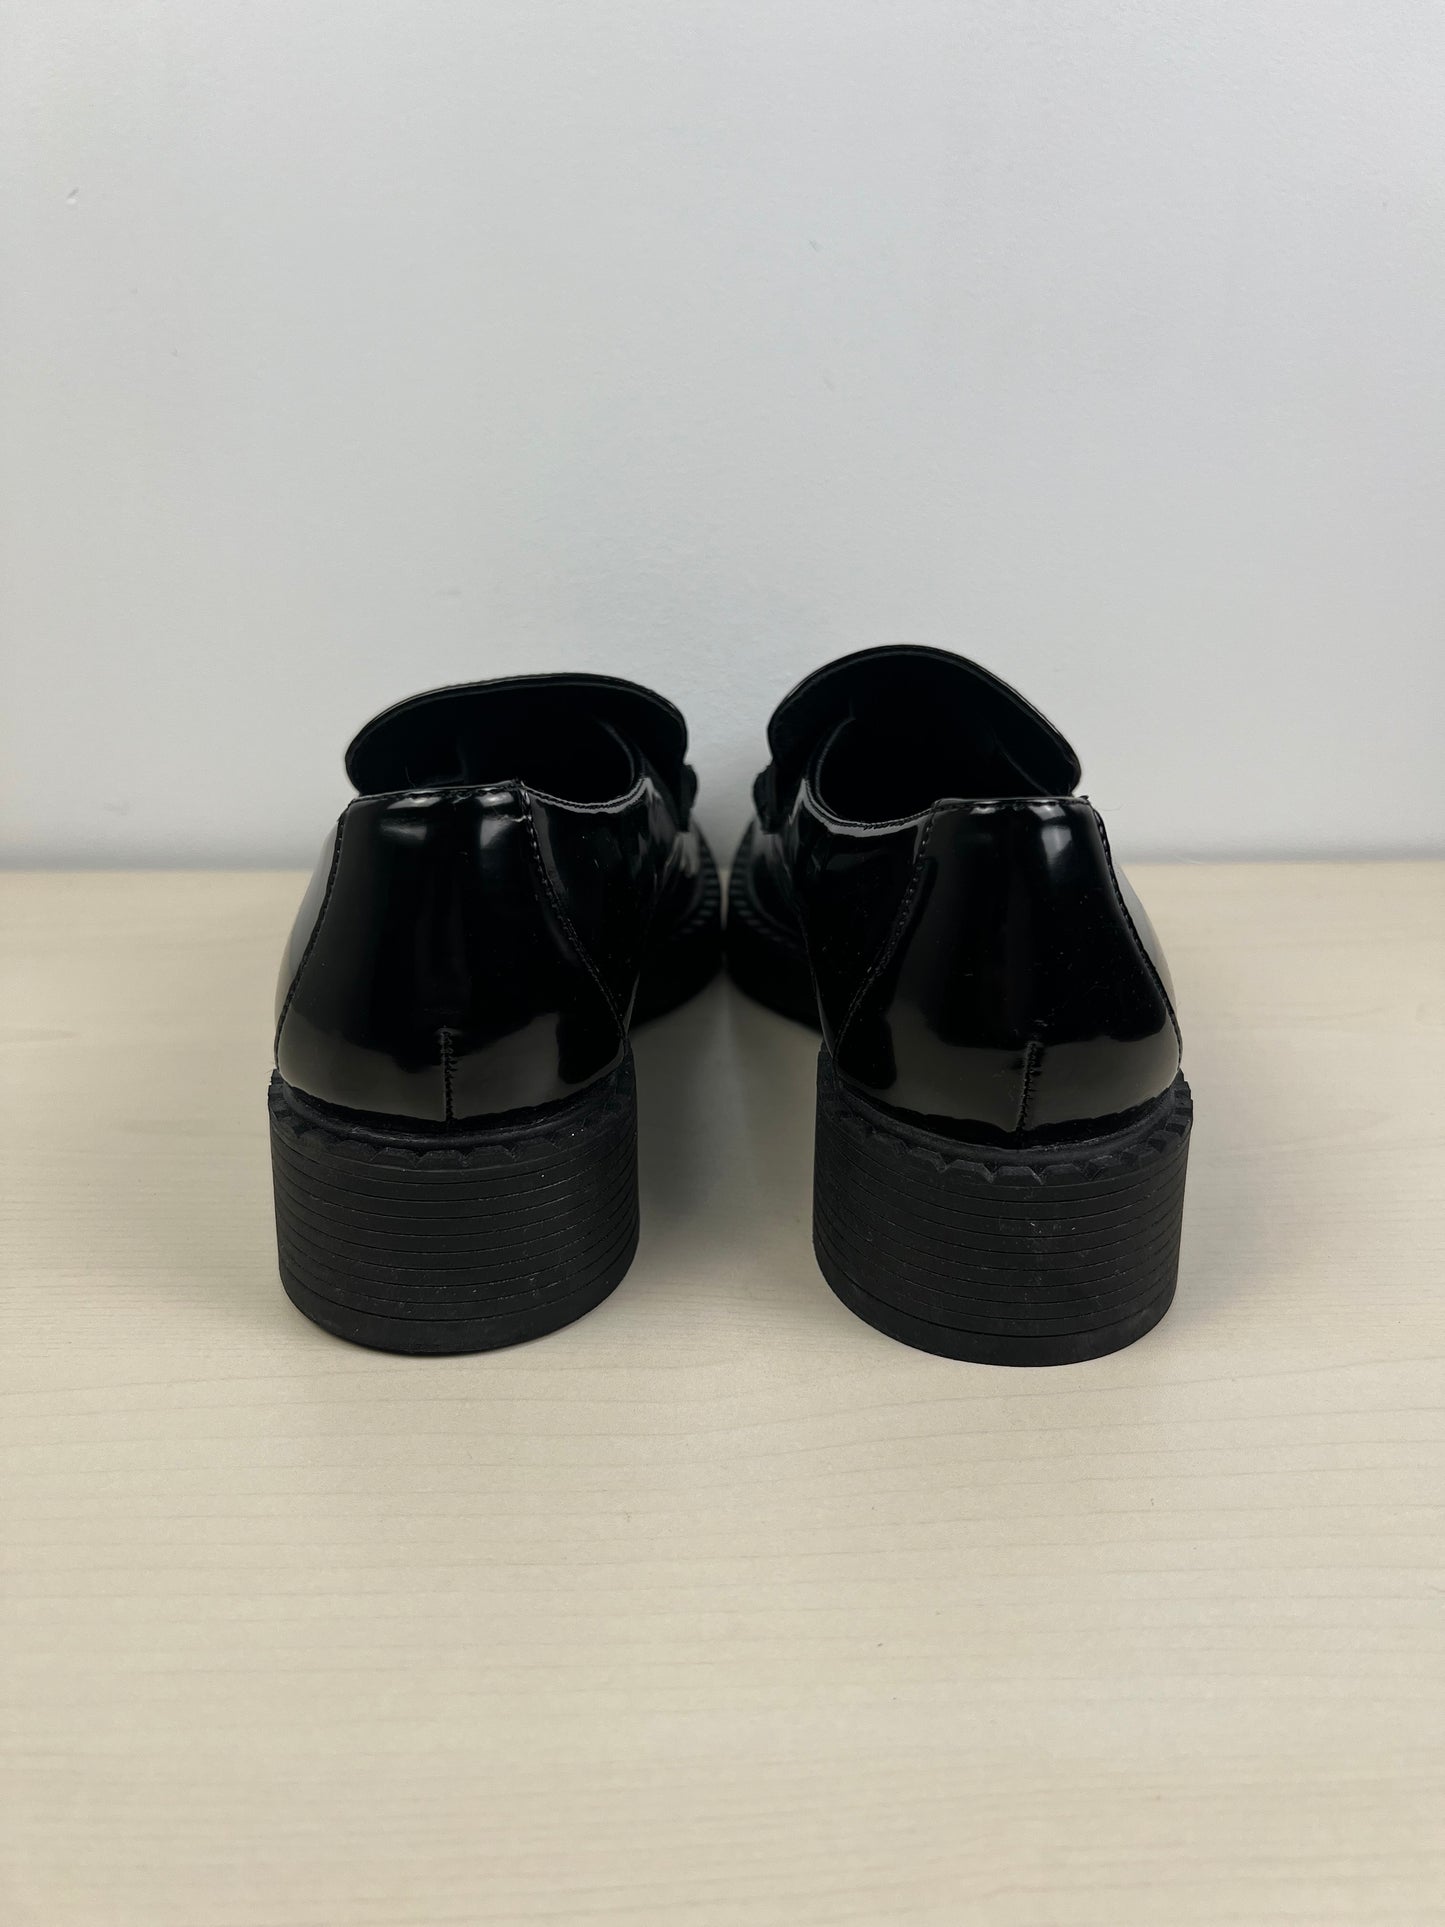 Shoes Flats By Madden Girl  Size: 9.5